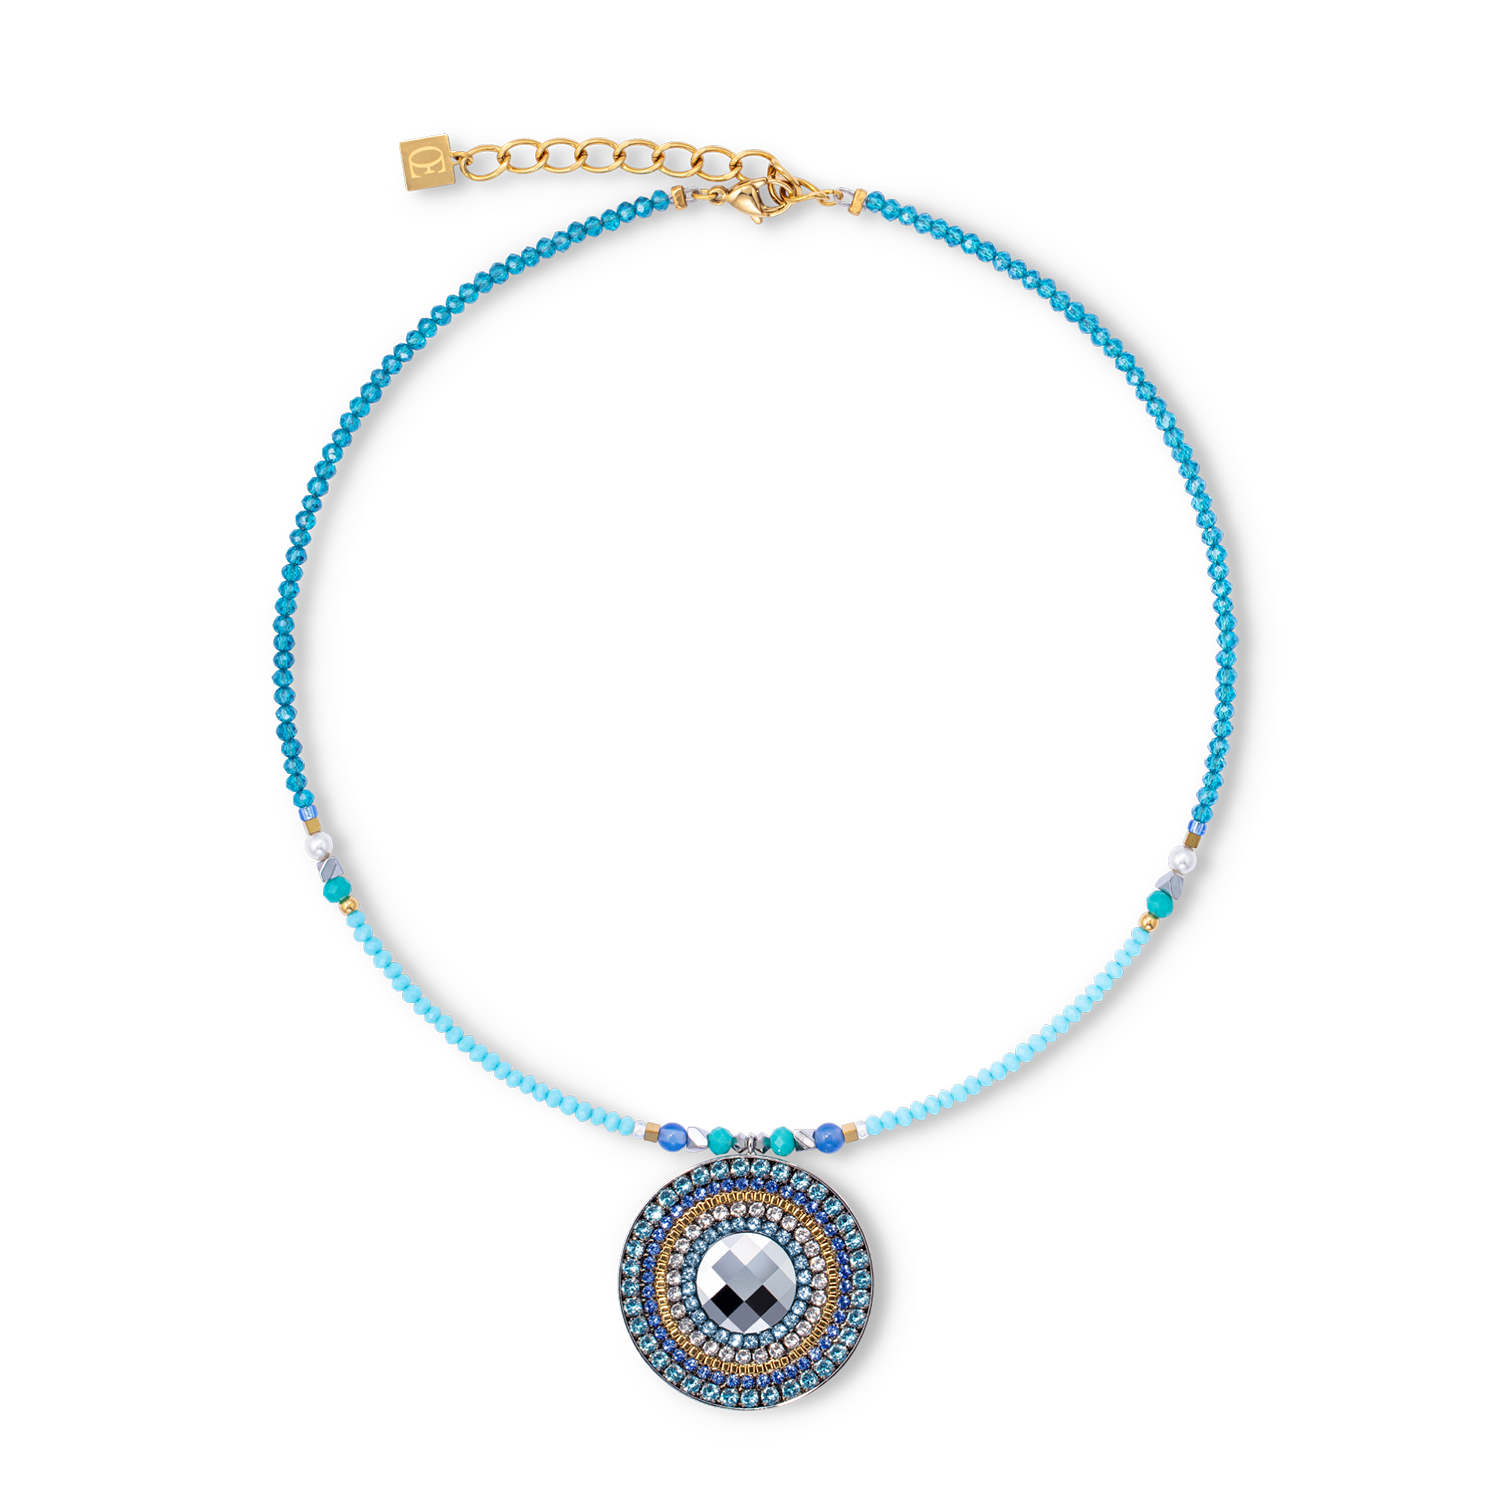 Collier Amulette Ocean Vibes turquoise or